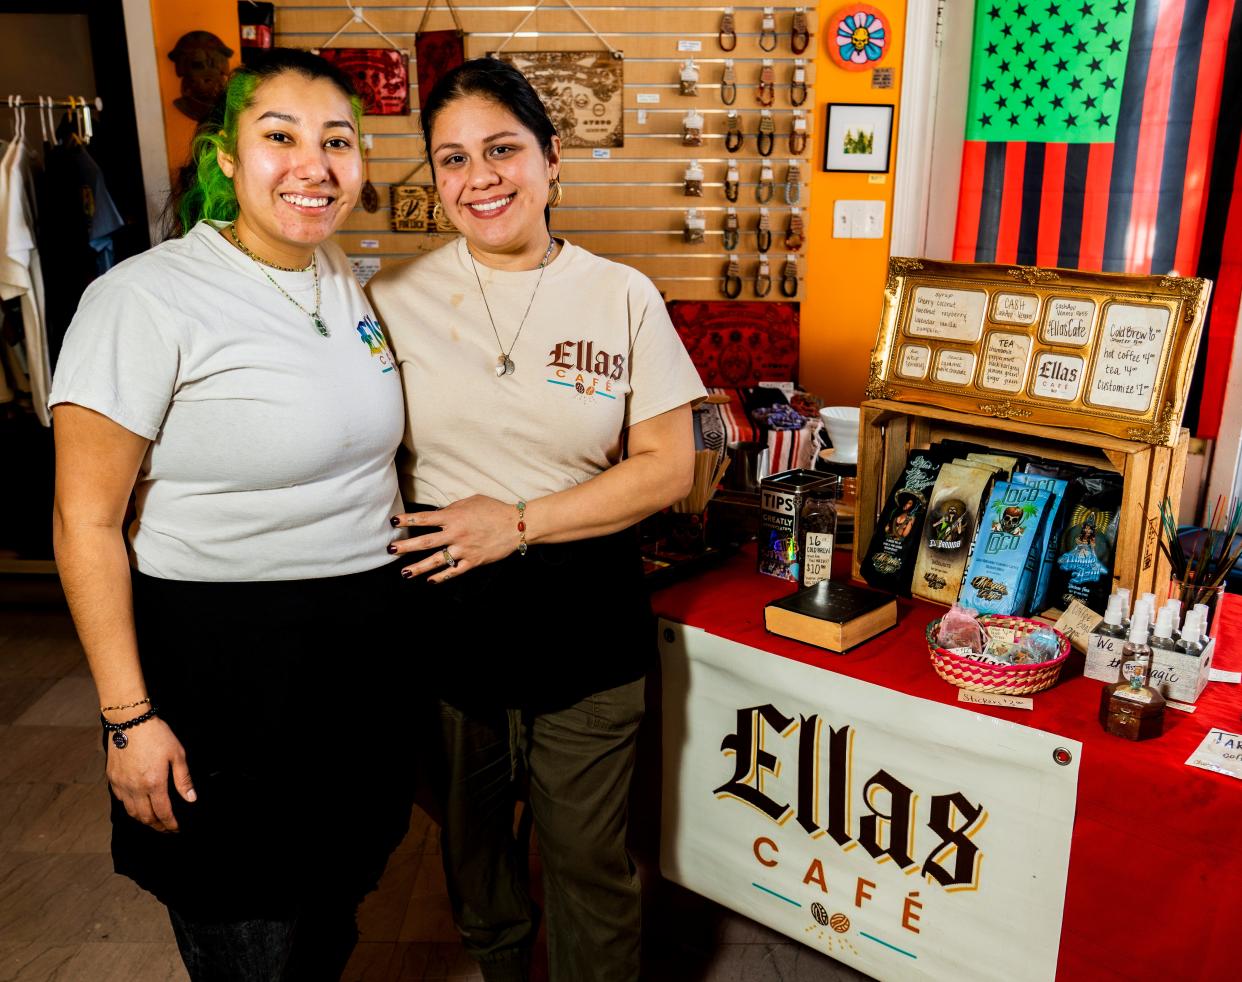 Reneé Valdez (left) and Sofía Fuentes (right), owners of Ellas Café, stand in front of their pop up coffee shop stand at Materia Magicka, a community based art and metaphysical supply shop on Sunday February 12, 2023 in Milwaukee, Wis.